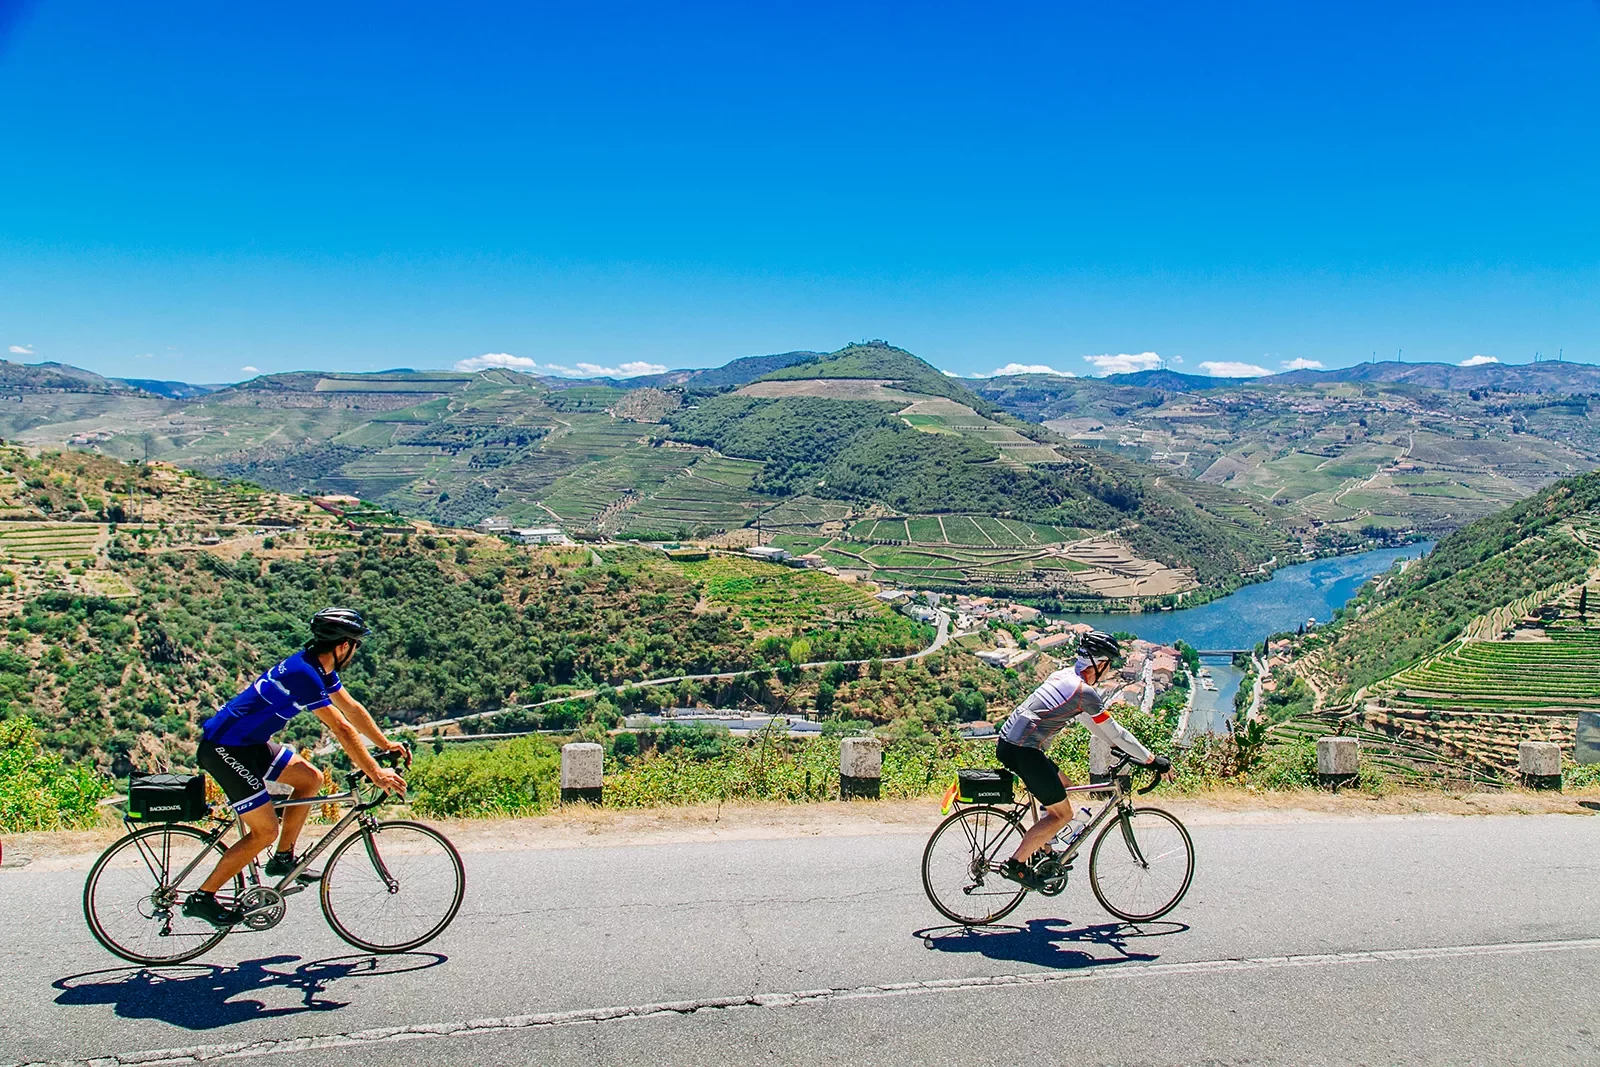 Two bikers riding on a road along the Douro River.